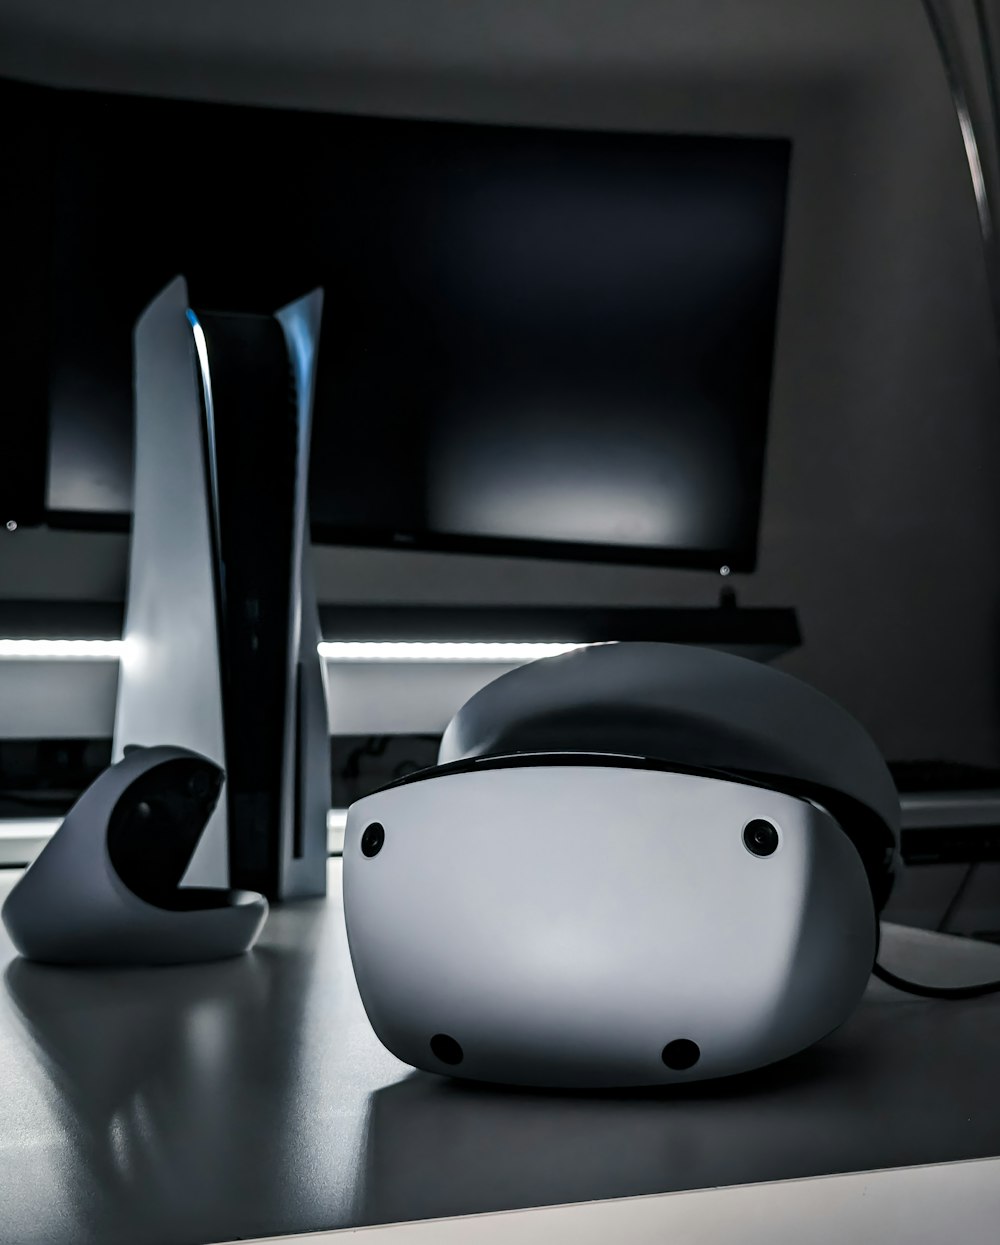 a pair of vr headset sitting on top of a desk